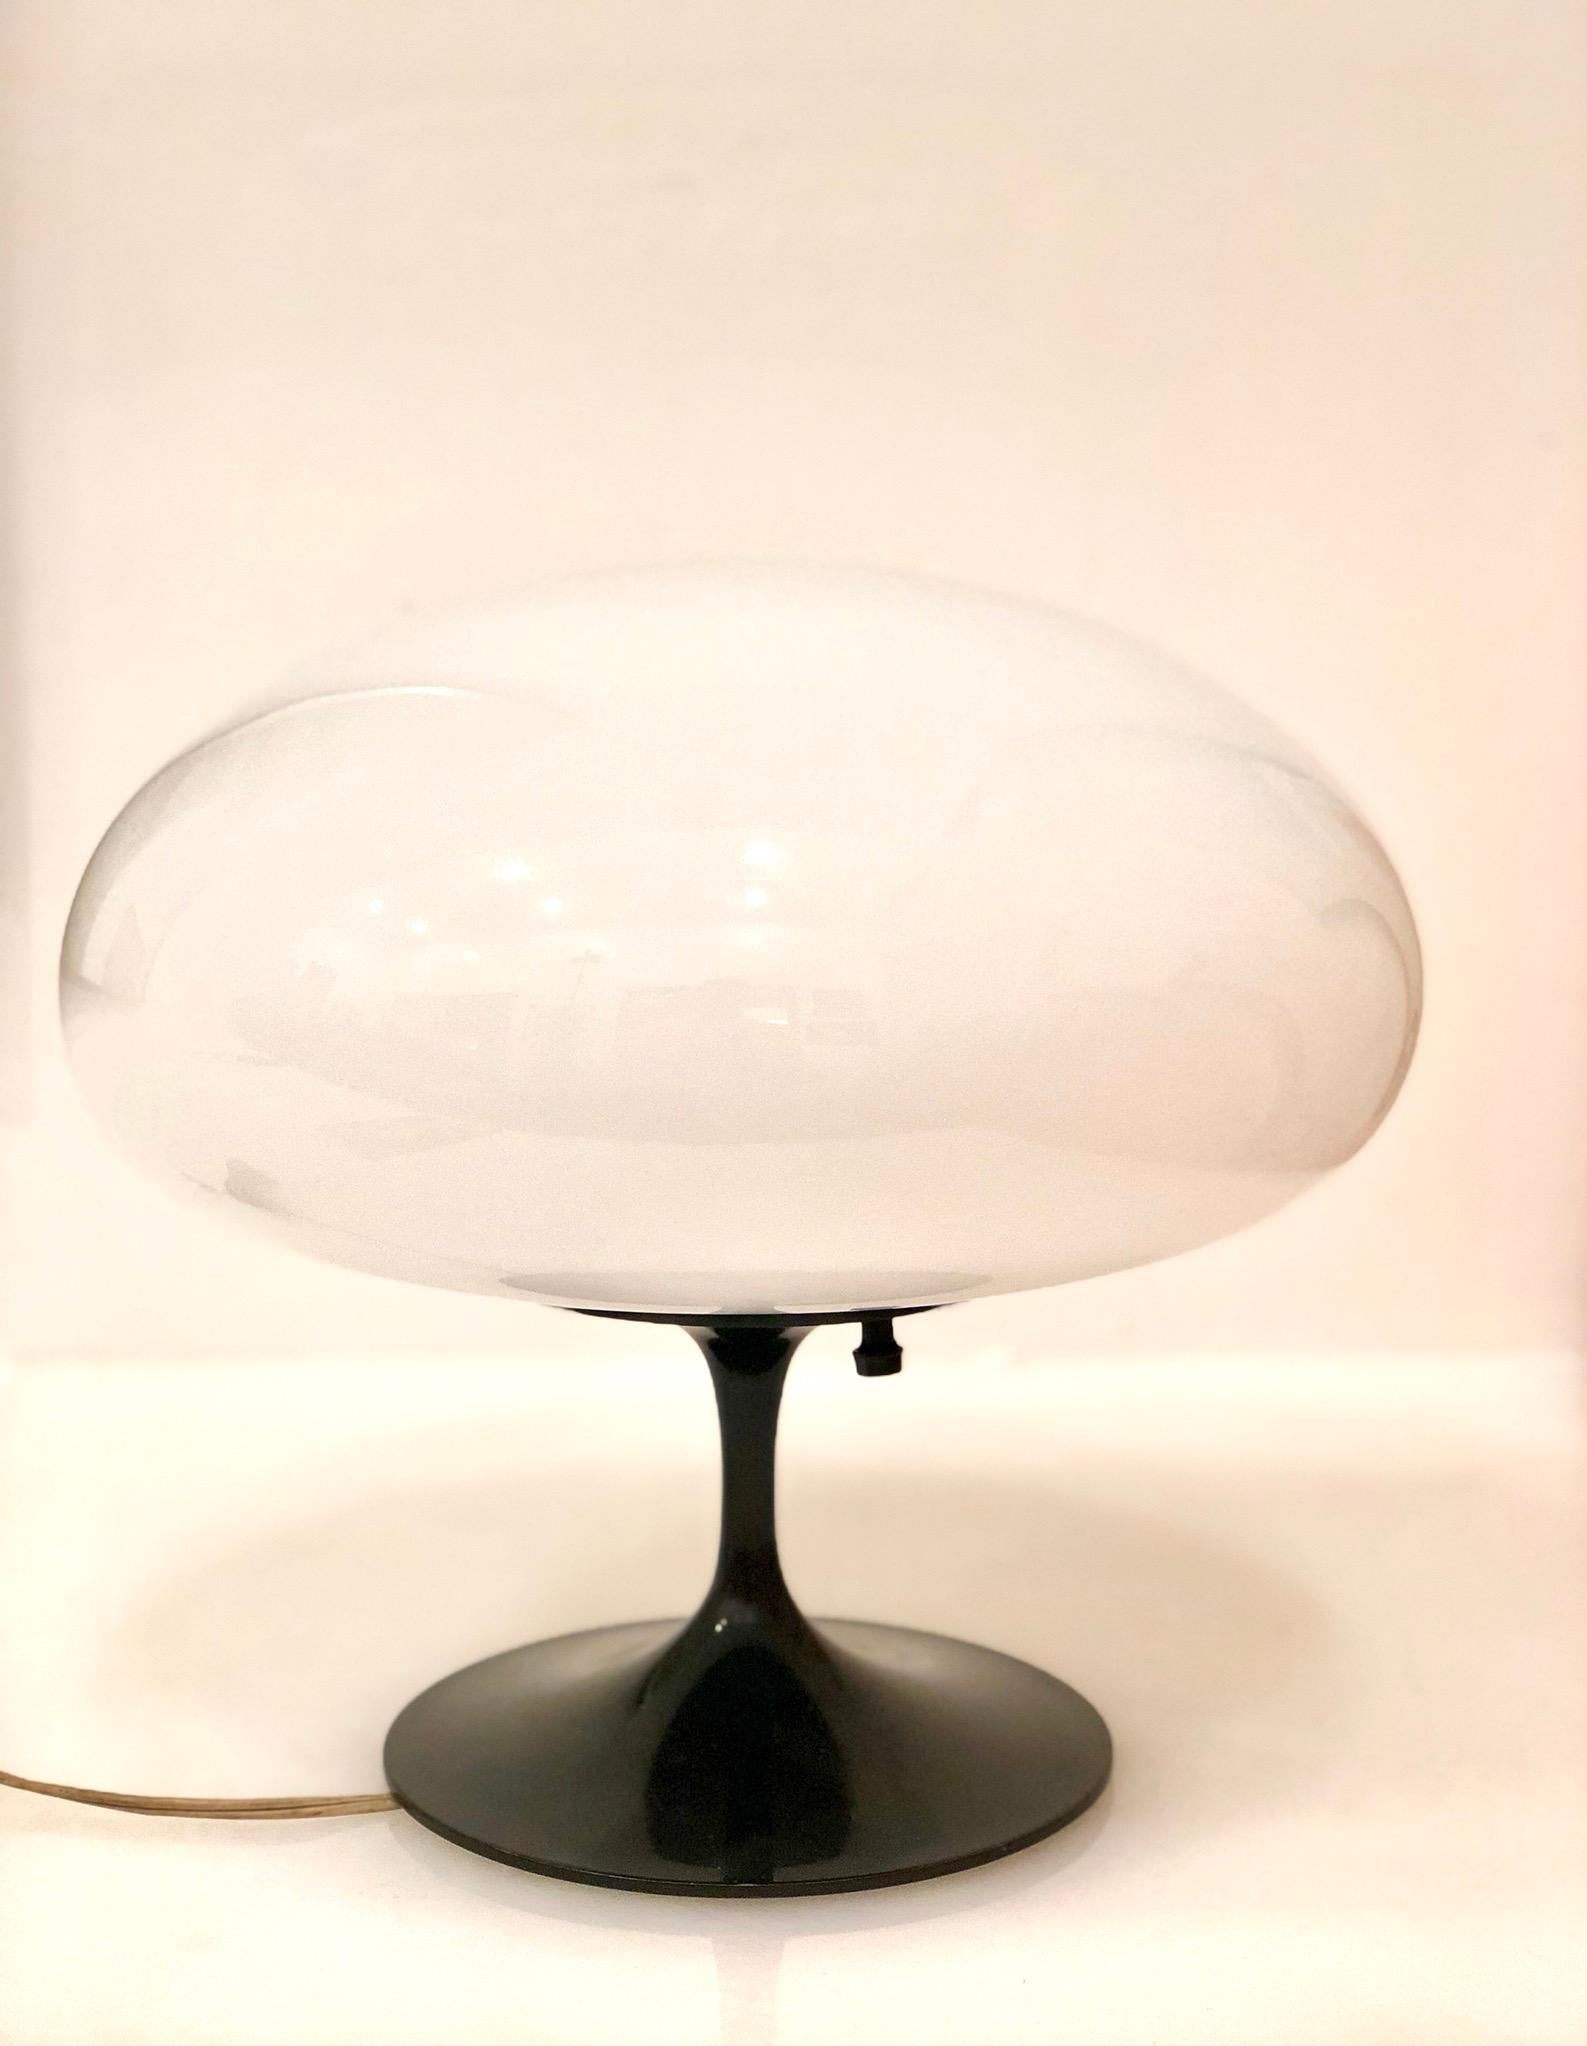 Rare mushroom tulip table lamp by Billy Curry / Design Line for Stemlite, circa 1960s. Nice black original enameled finish. I perfect working condition.